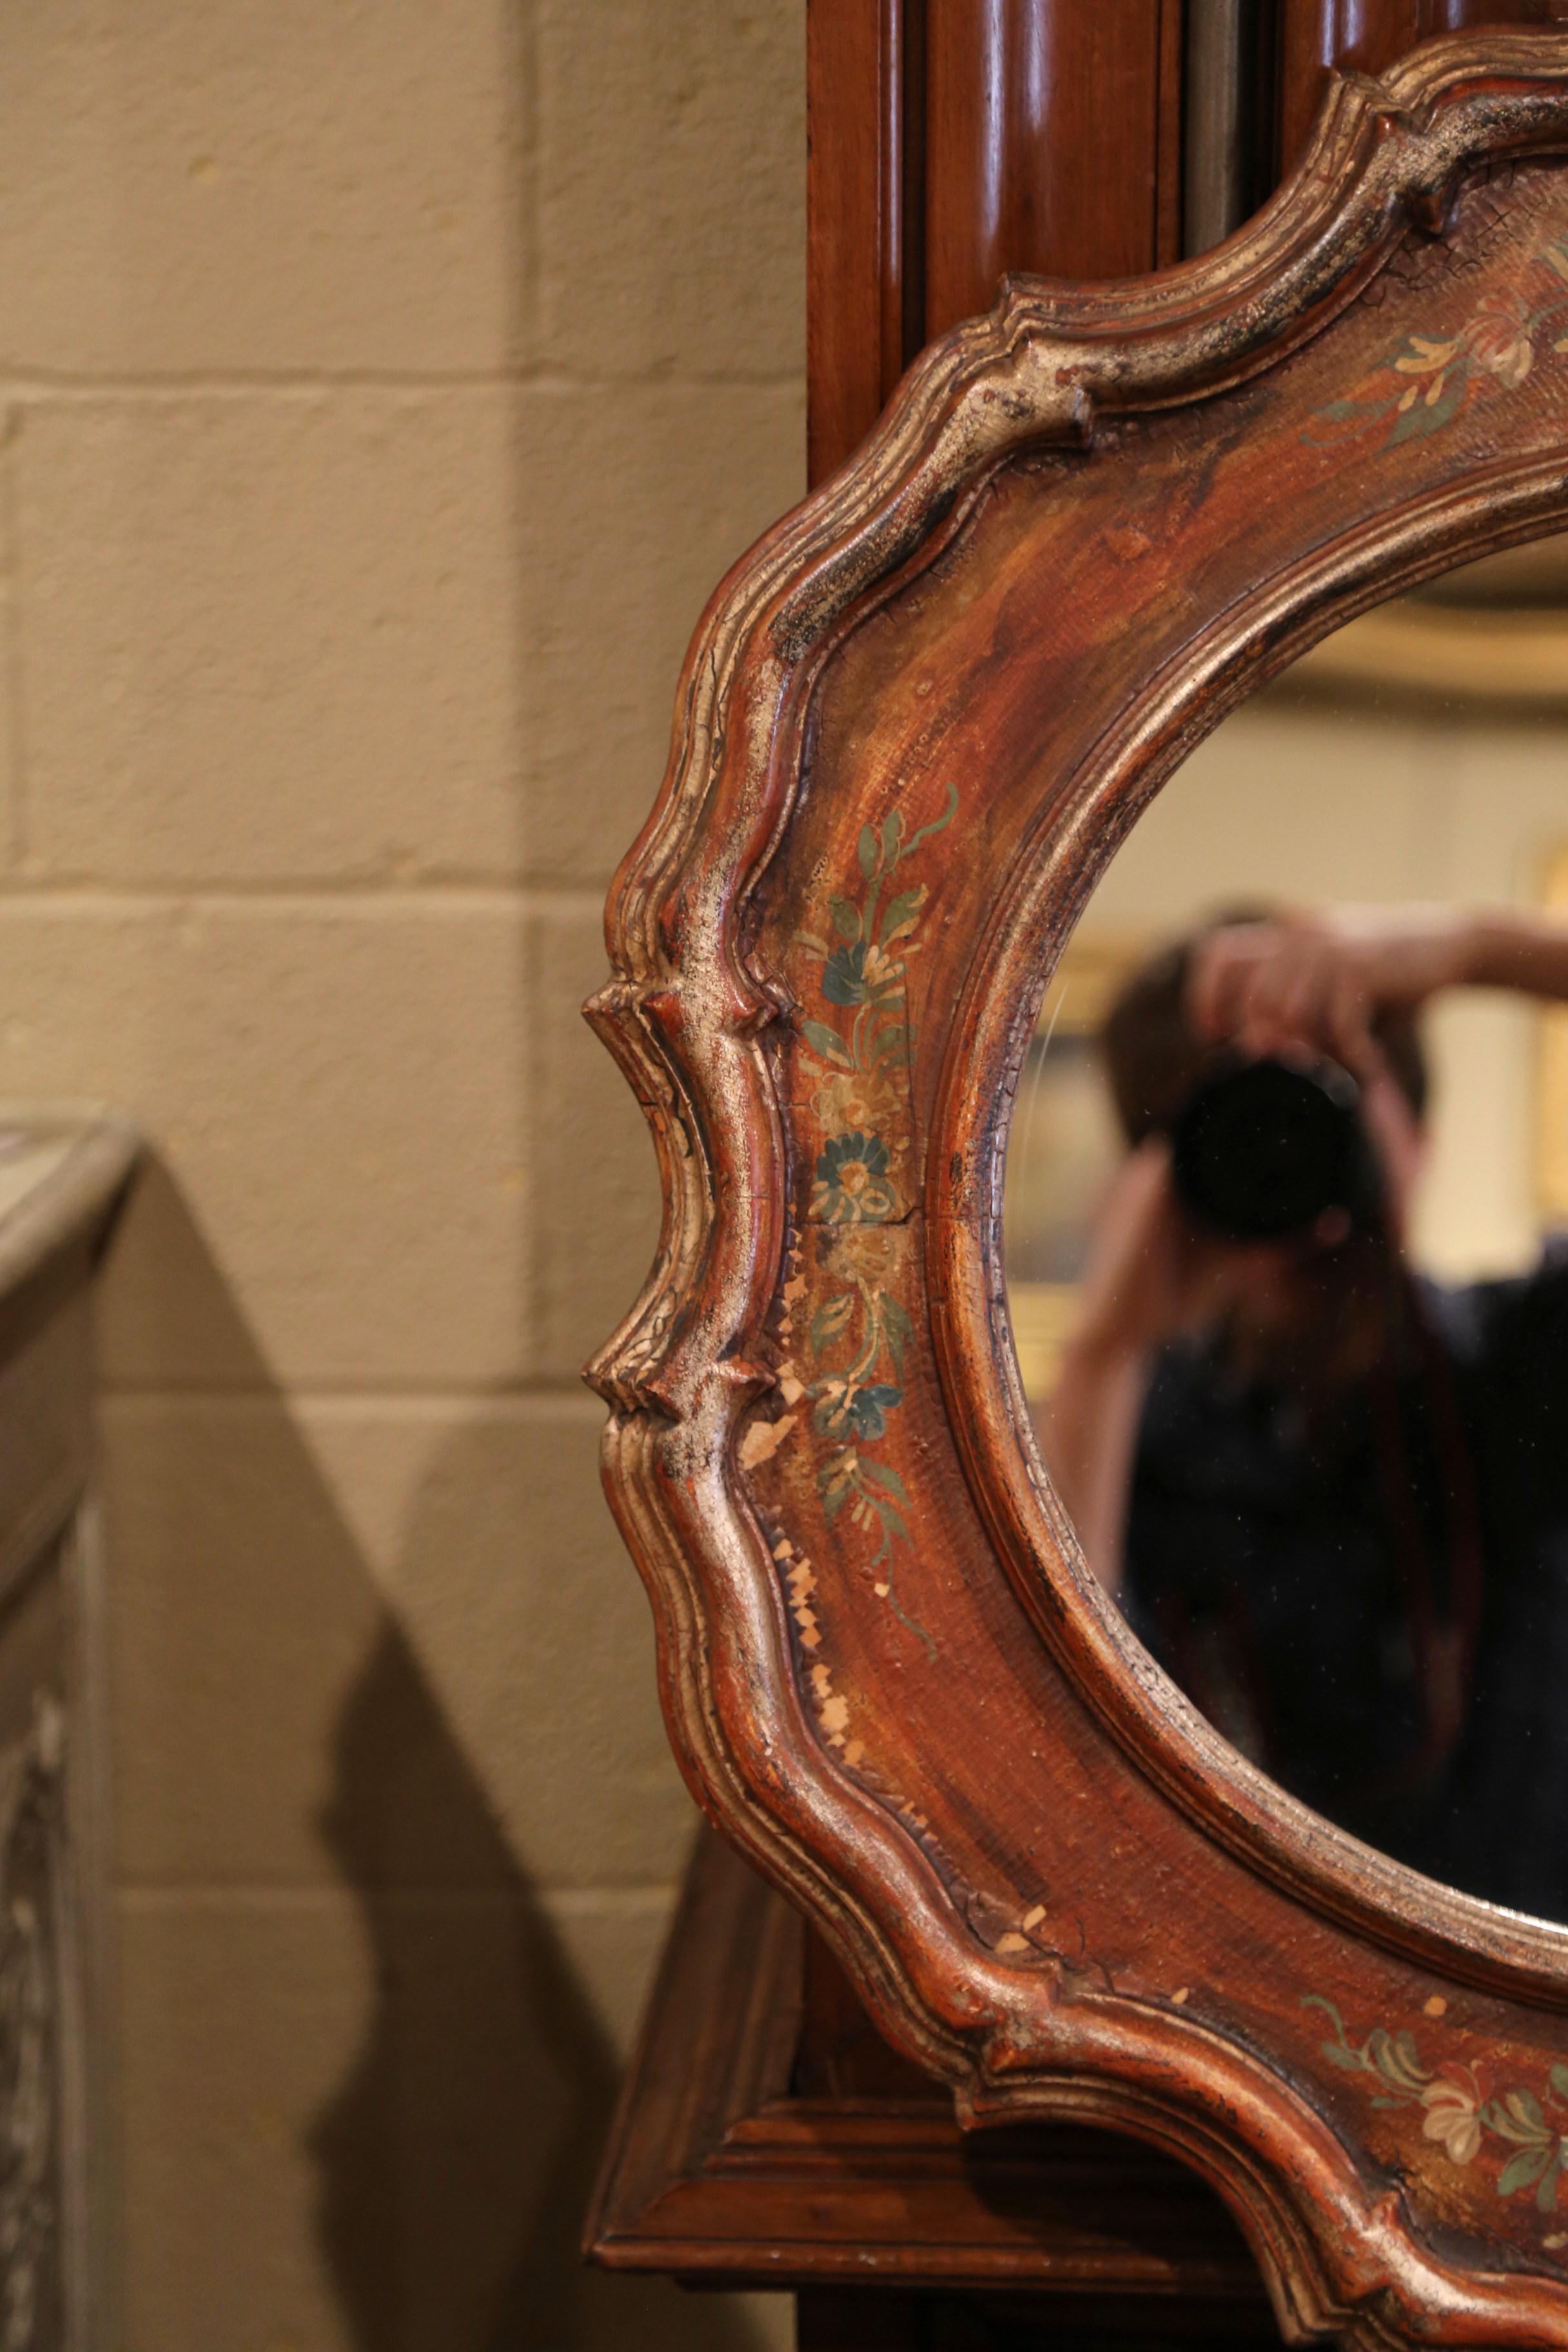 Decorate a powder room or a girl's bedroom with this elegant antique mirror. Crafted in Italy circa 1960 and round in shape, the colorful carved mirror features a thick scrolled molding around the frame with a circular glass in the center, the frame